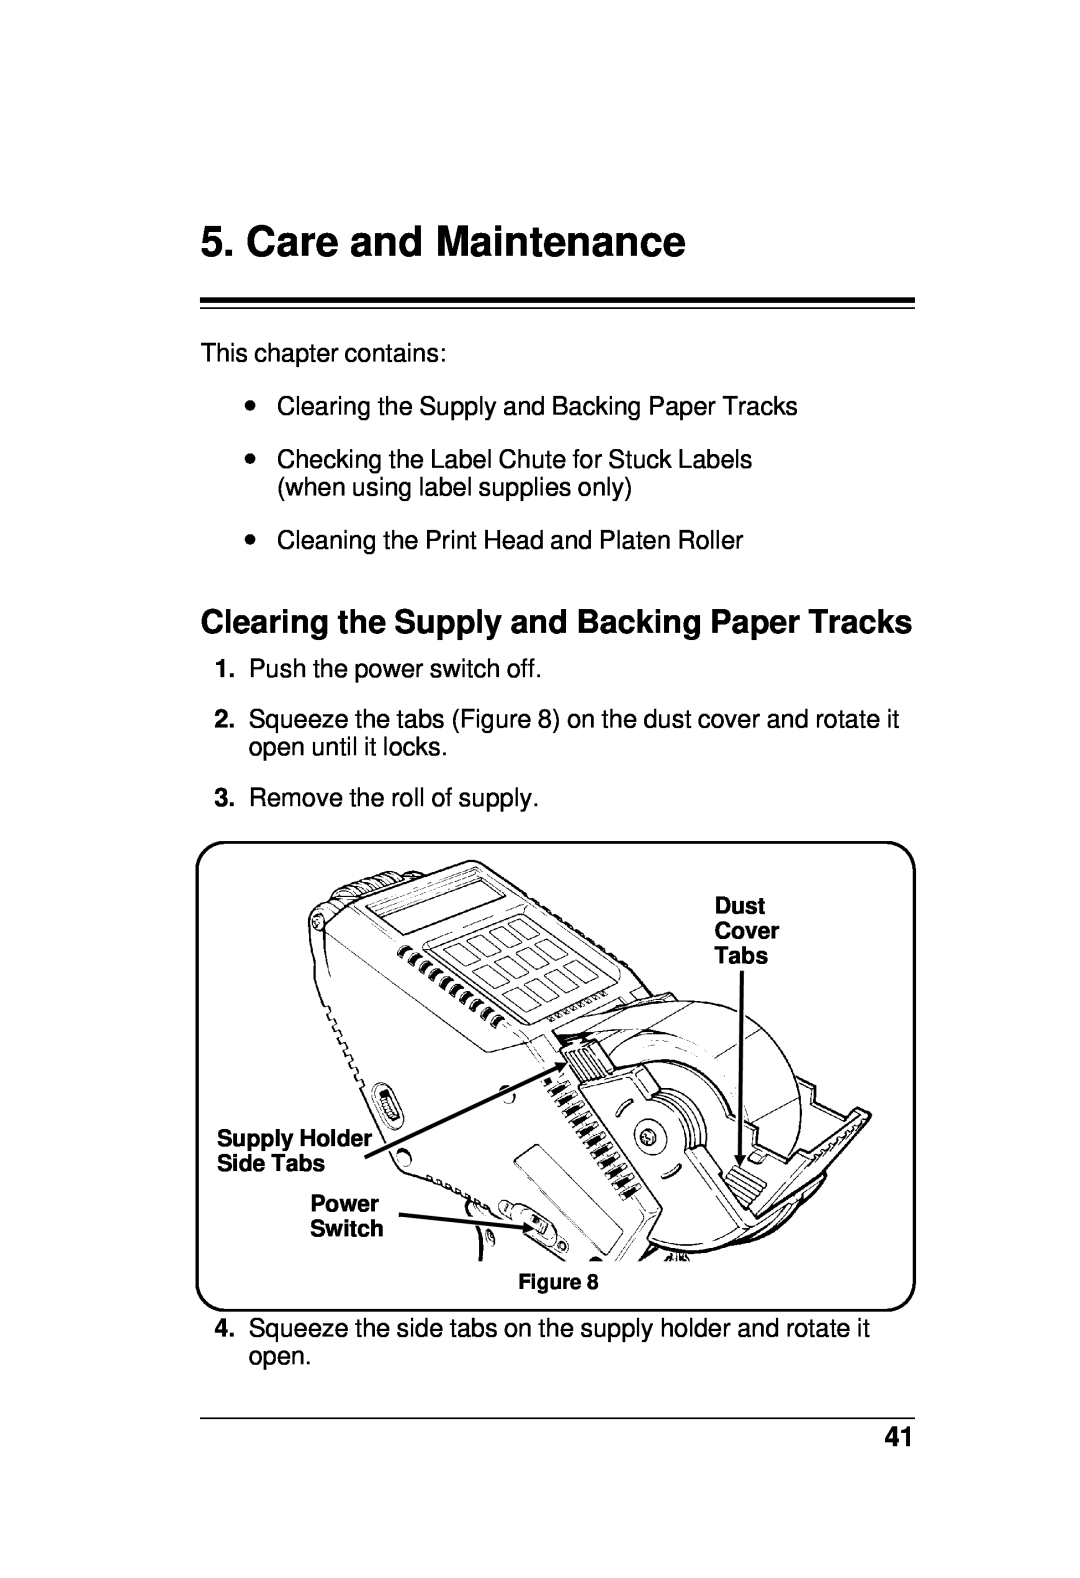 Paxar TC6021OH manual Care and Maintenance, Clearing the Supply and Backing Paper Tracks 